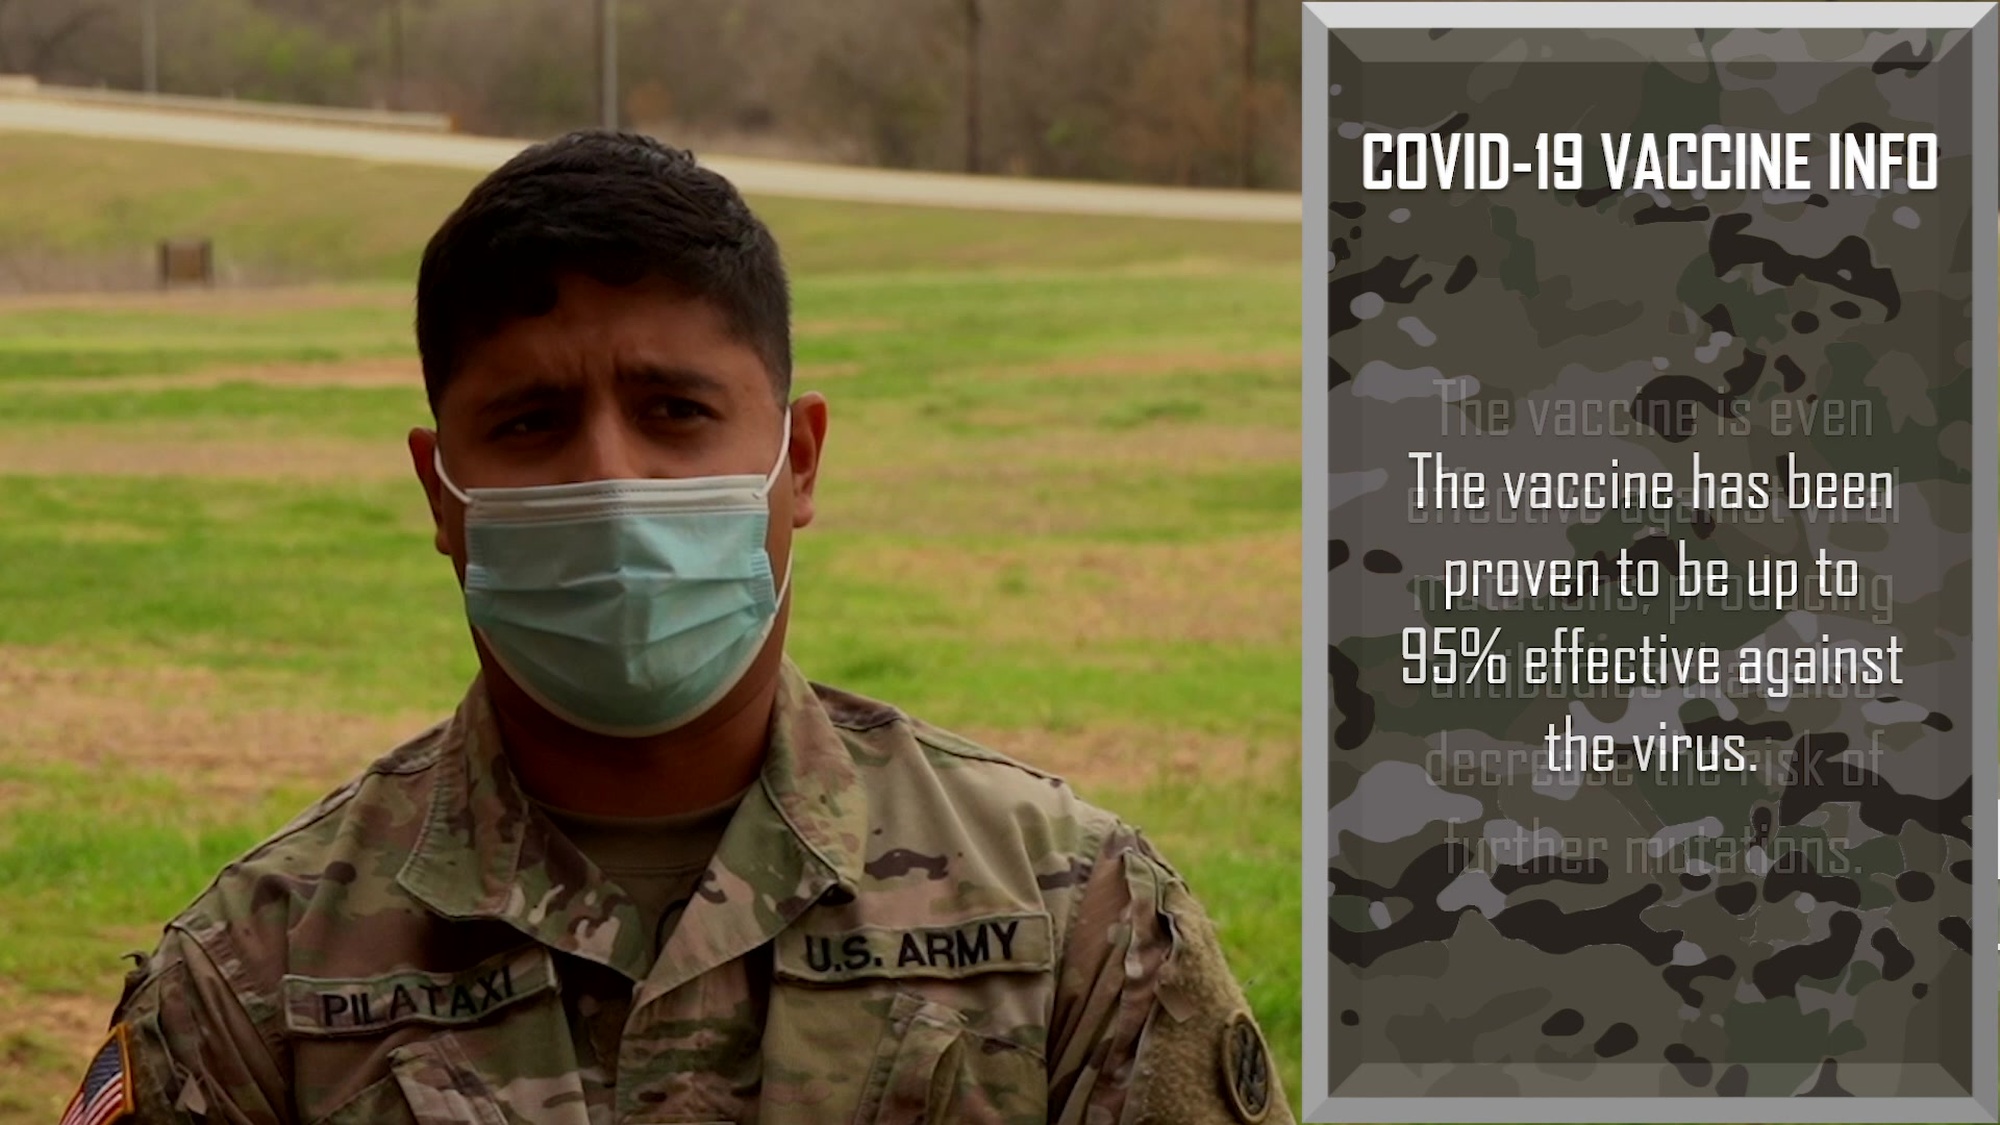 Soldiers of the 4th Sustainment Command (Expeditionary) discuss their reasons for receiving the COVID-19 vaccination during their ongoing COVID-19 response mission in support of the 377th Theater Sustainment Command and U.S. Army North.